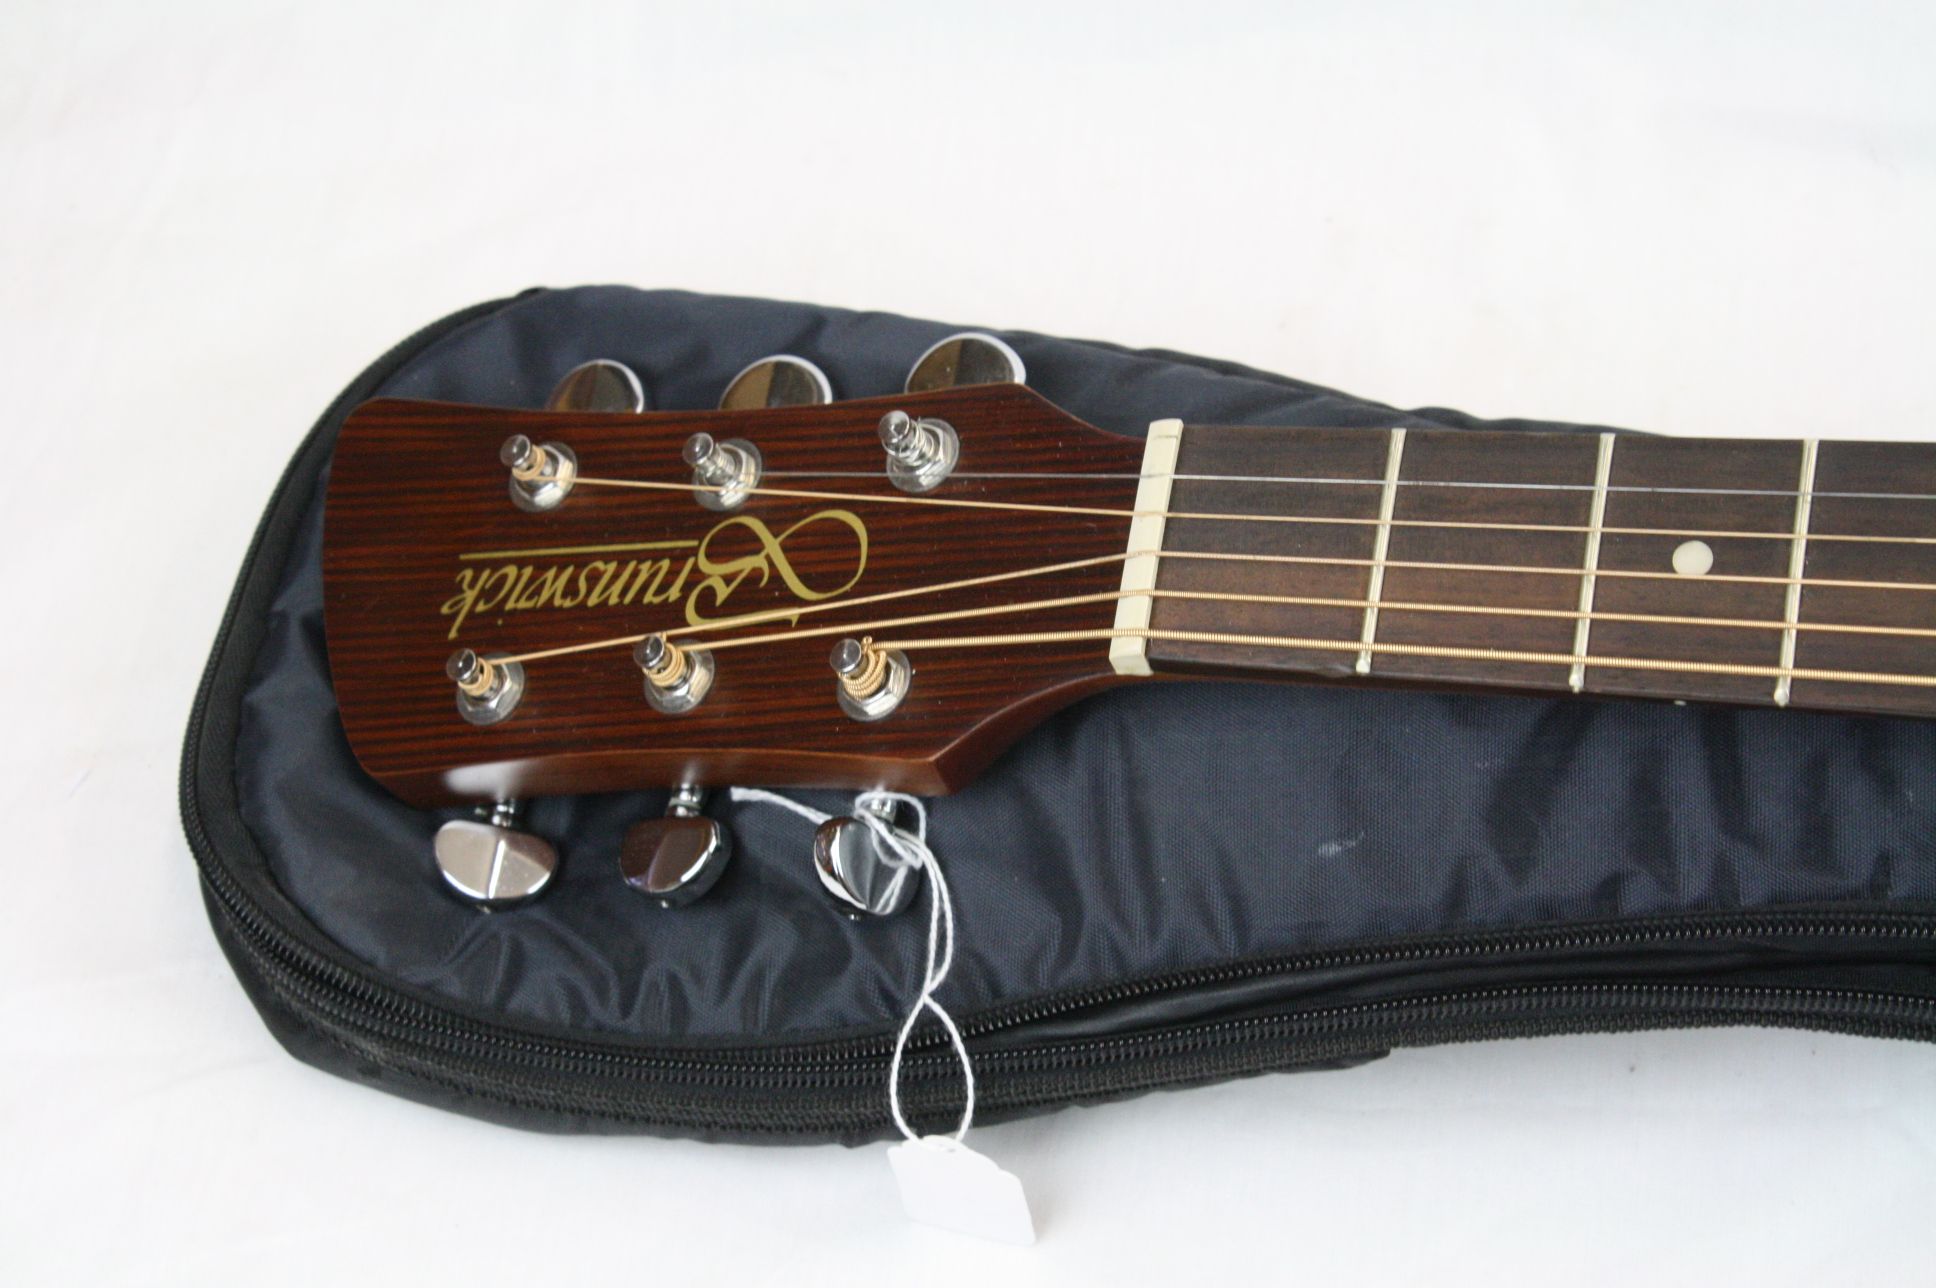 Guitar - A Brunswick BF200 acoustic guitar in natural finish, along with a gig bag. Good condition. - Image 4 of 6